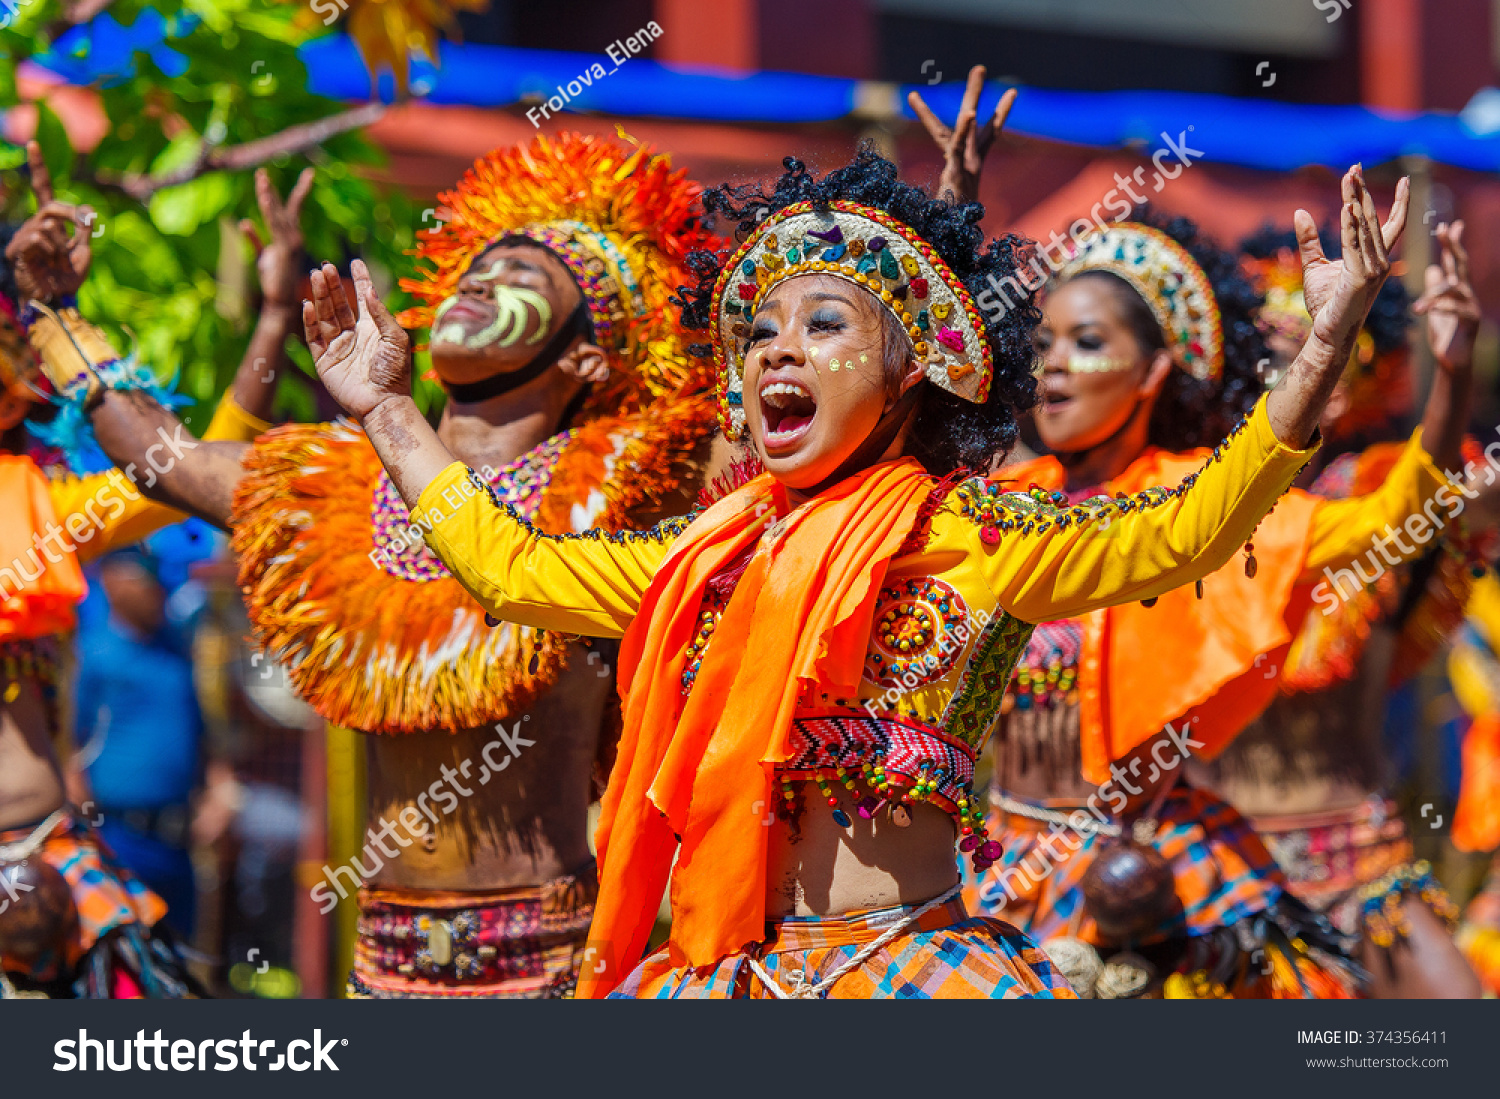 15,900 Philippines festival Images, Stock Photos & Vectors | Shutterstock